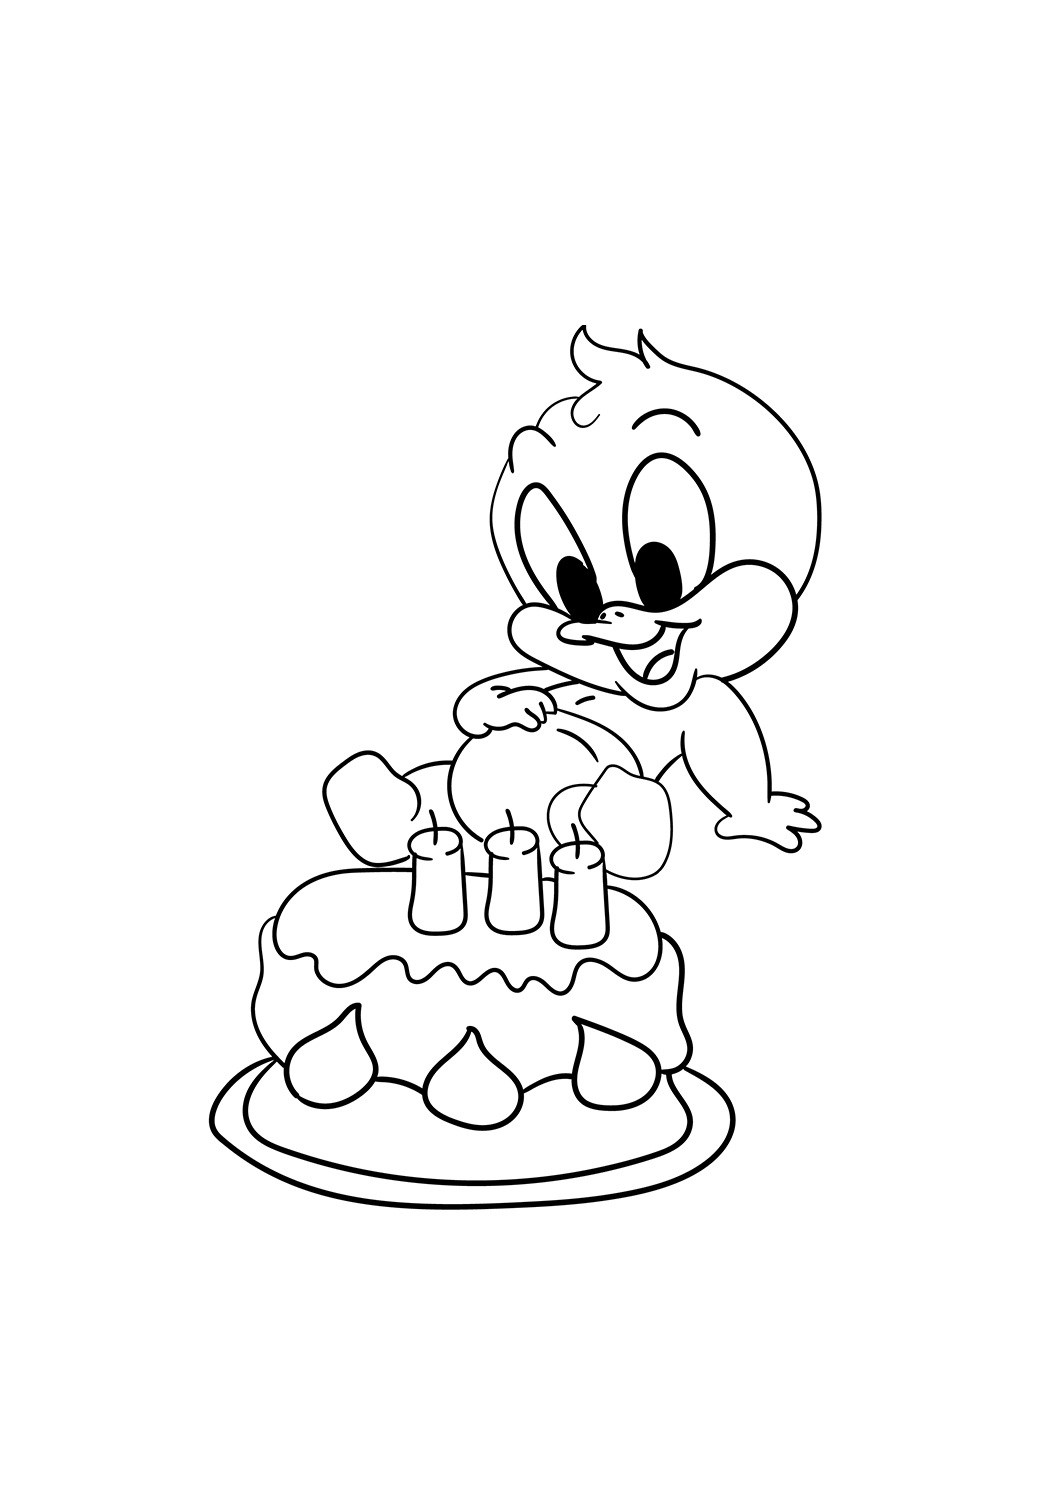 Cute Baby Daffy Duck Coloring - Play Free Coloring Game Online